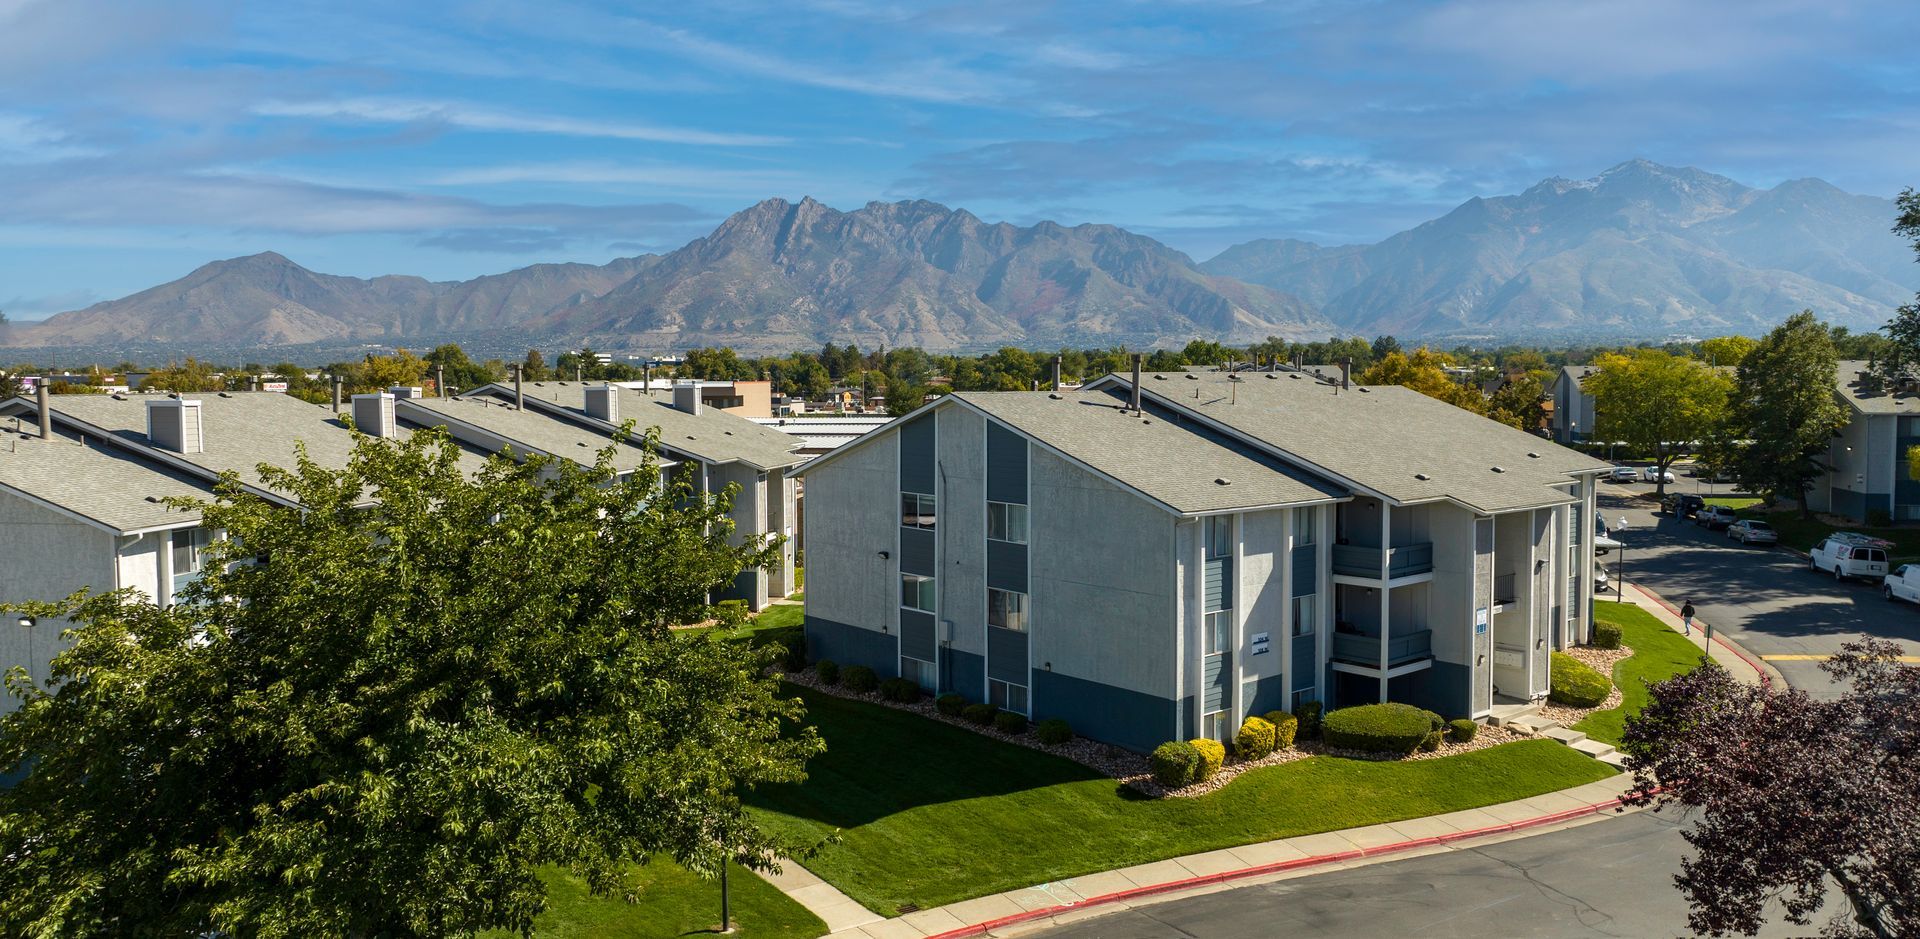 an aerial view of a apartment complex with mountains in the background .